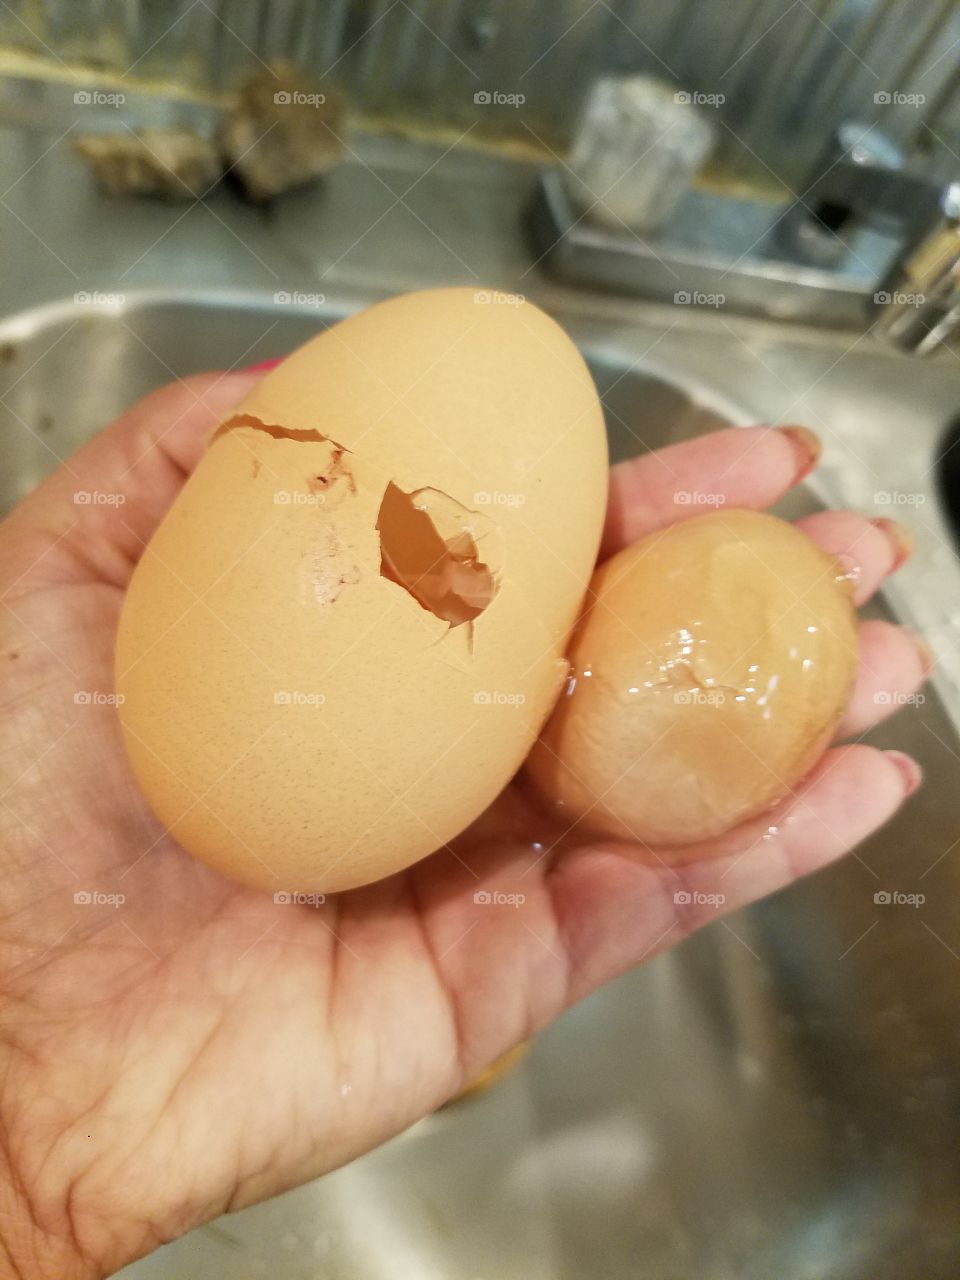 my girls laid an egg in a egg, so proud